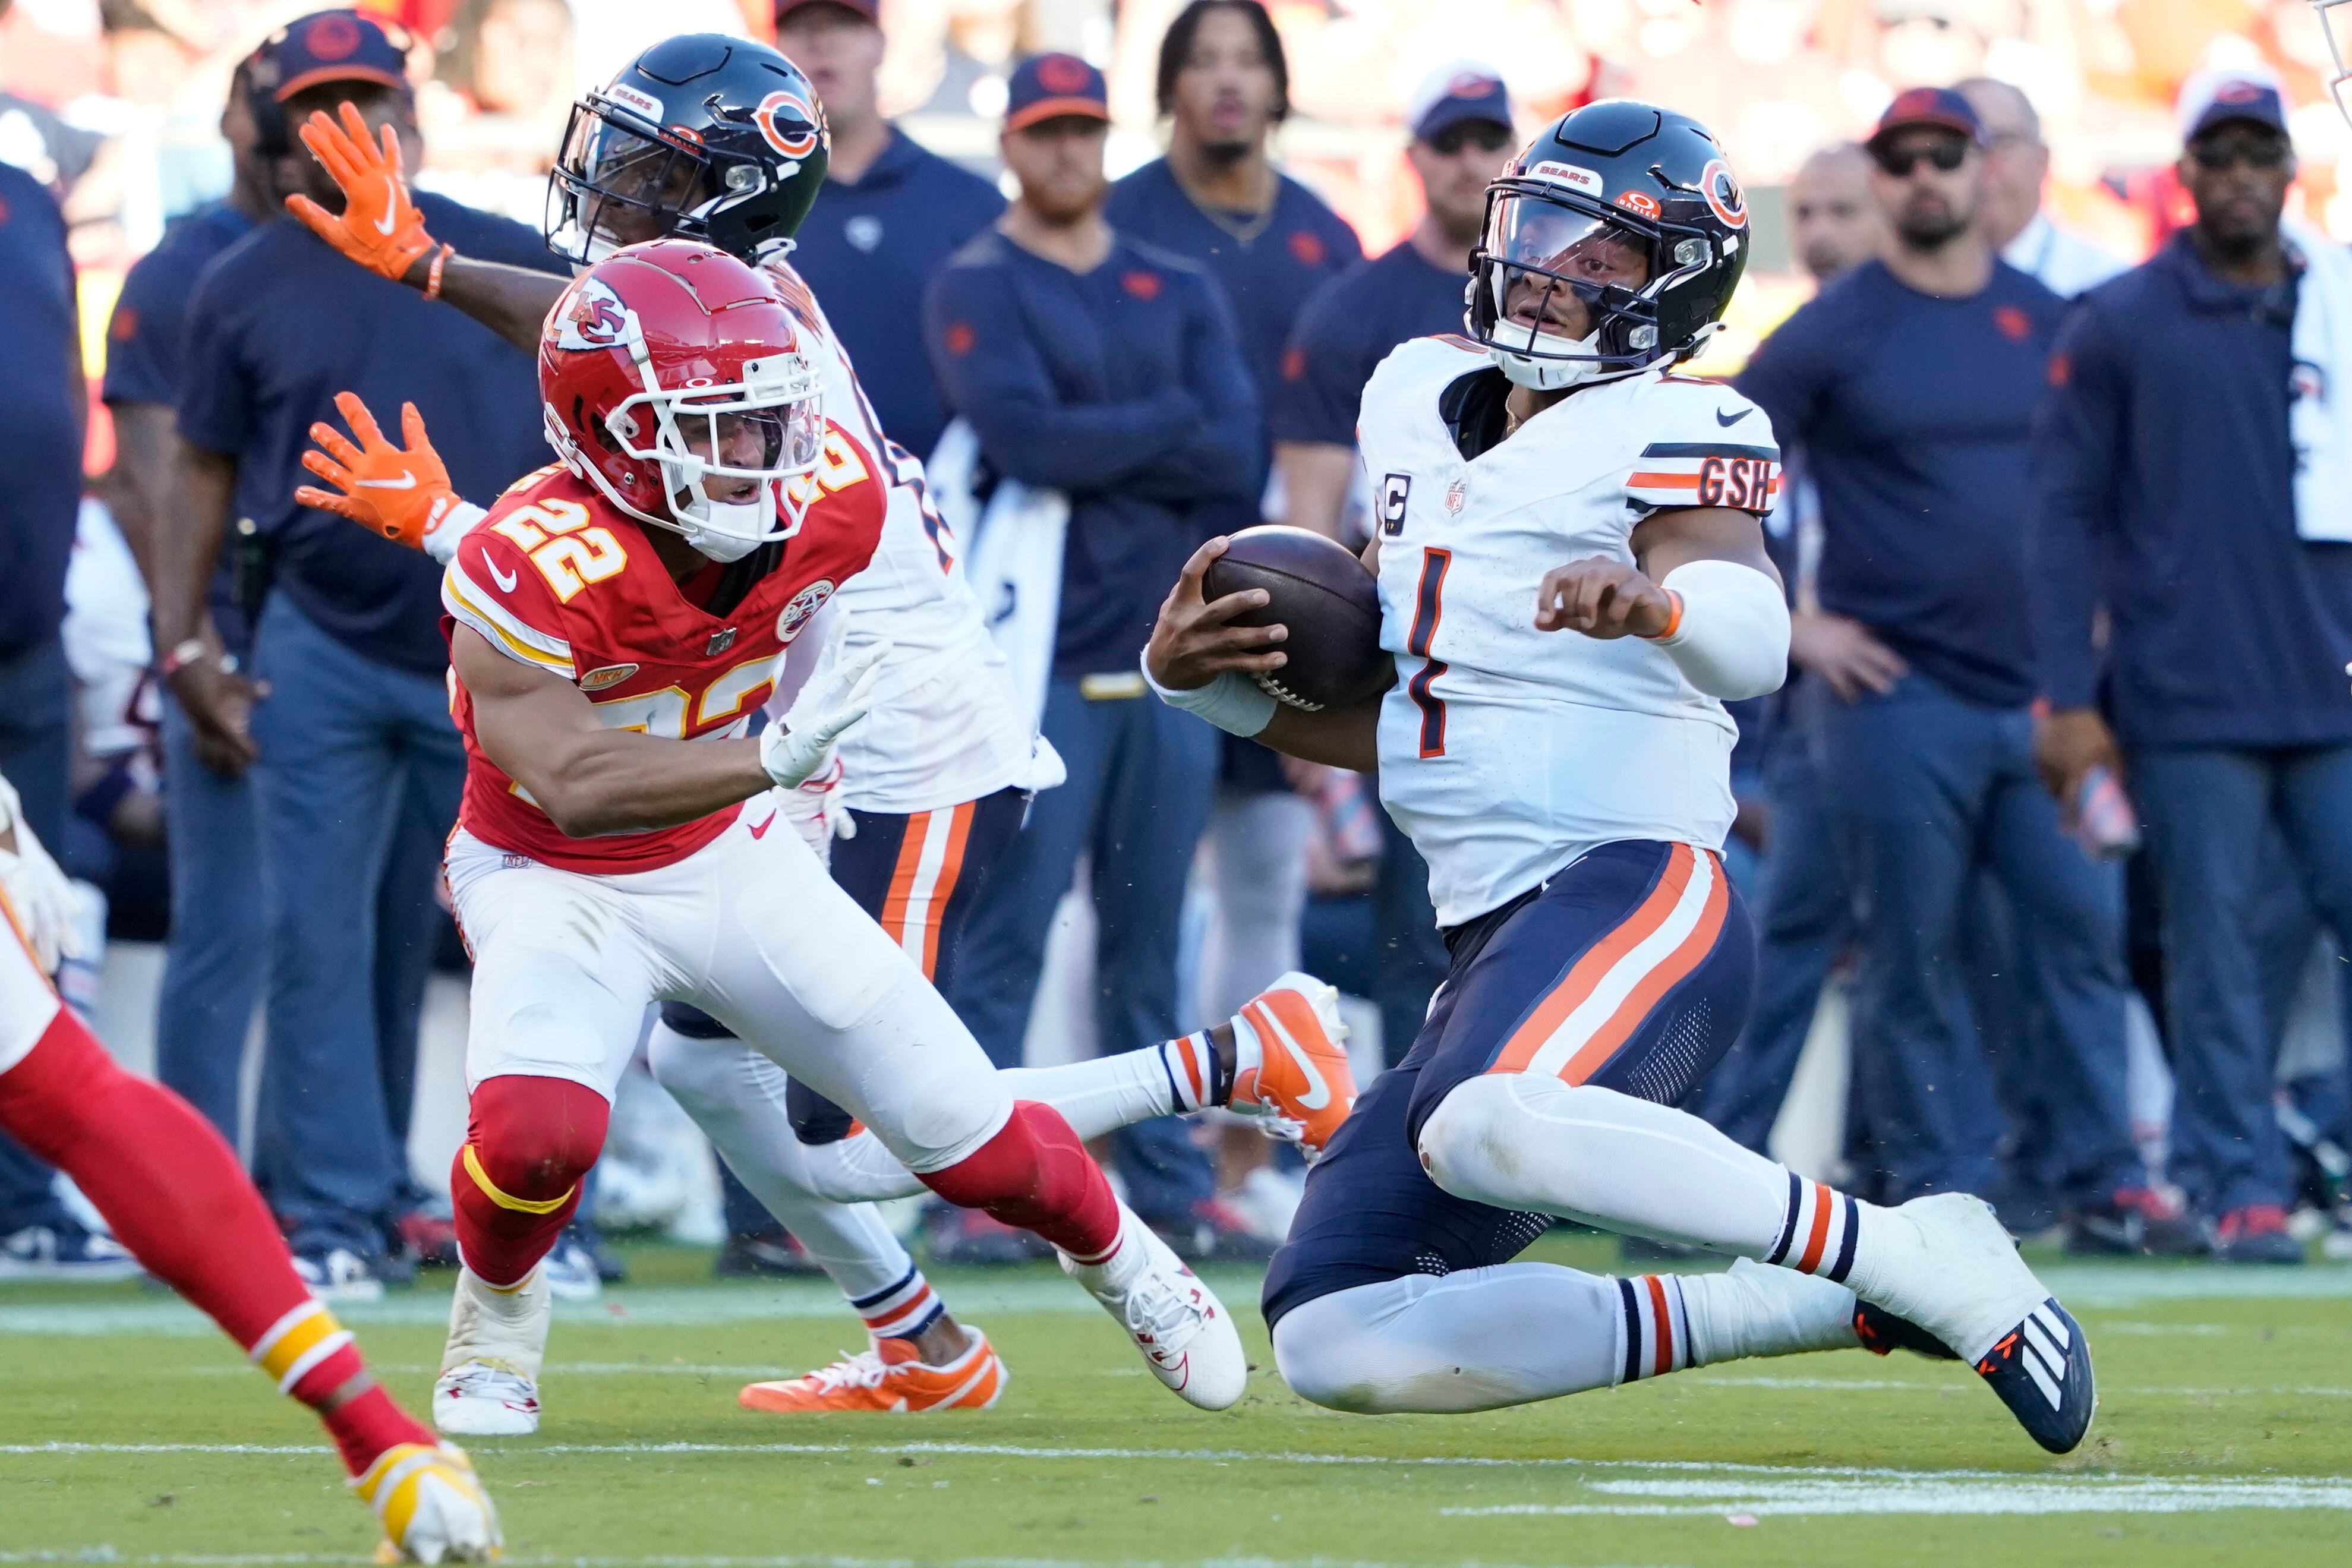 Chicago Bears quarterback Justin Fields (1) runs with the ball as Kansas City Chiefs cornerback Trent McDuffie (22) defends during the second half of an NFL football game Sunday, Sept. 24, 2023, in Kansas City, Mo. (AP Photo/Ed Zurga)